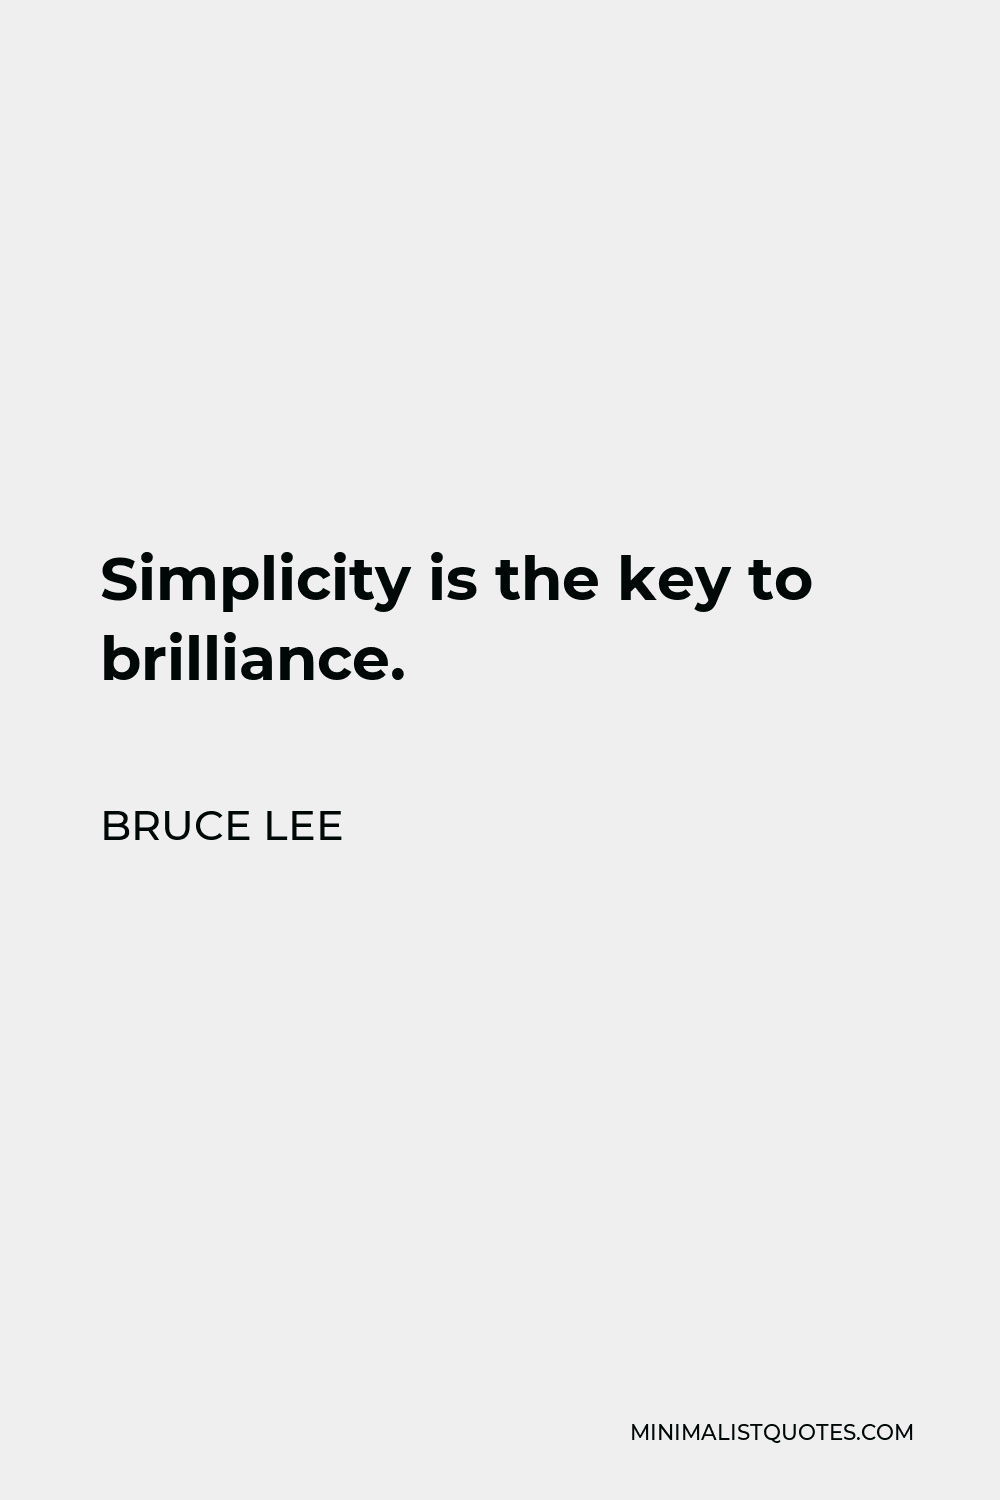 Bruce Lee Quote - Simplicity is the key to brilliance.